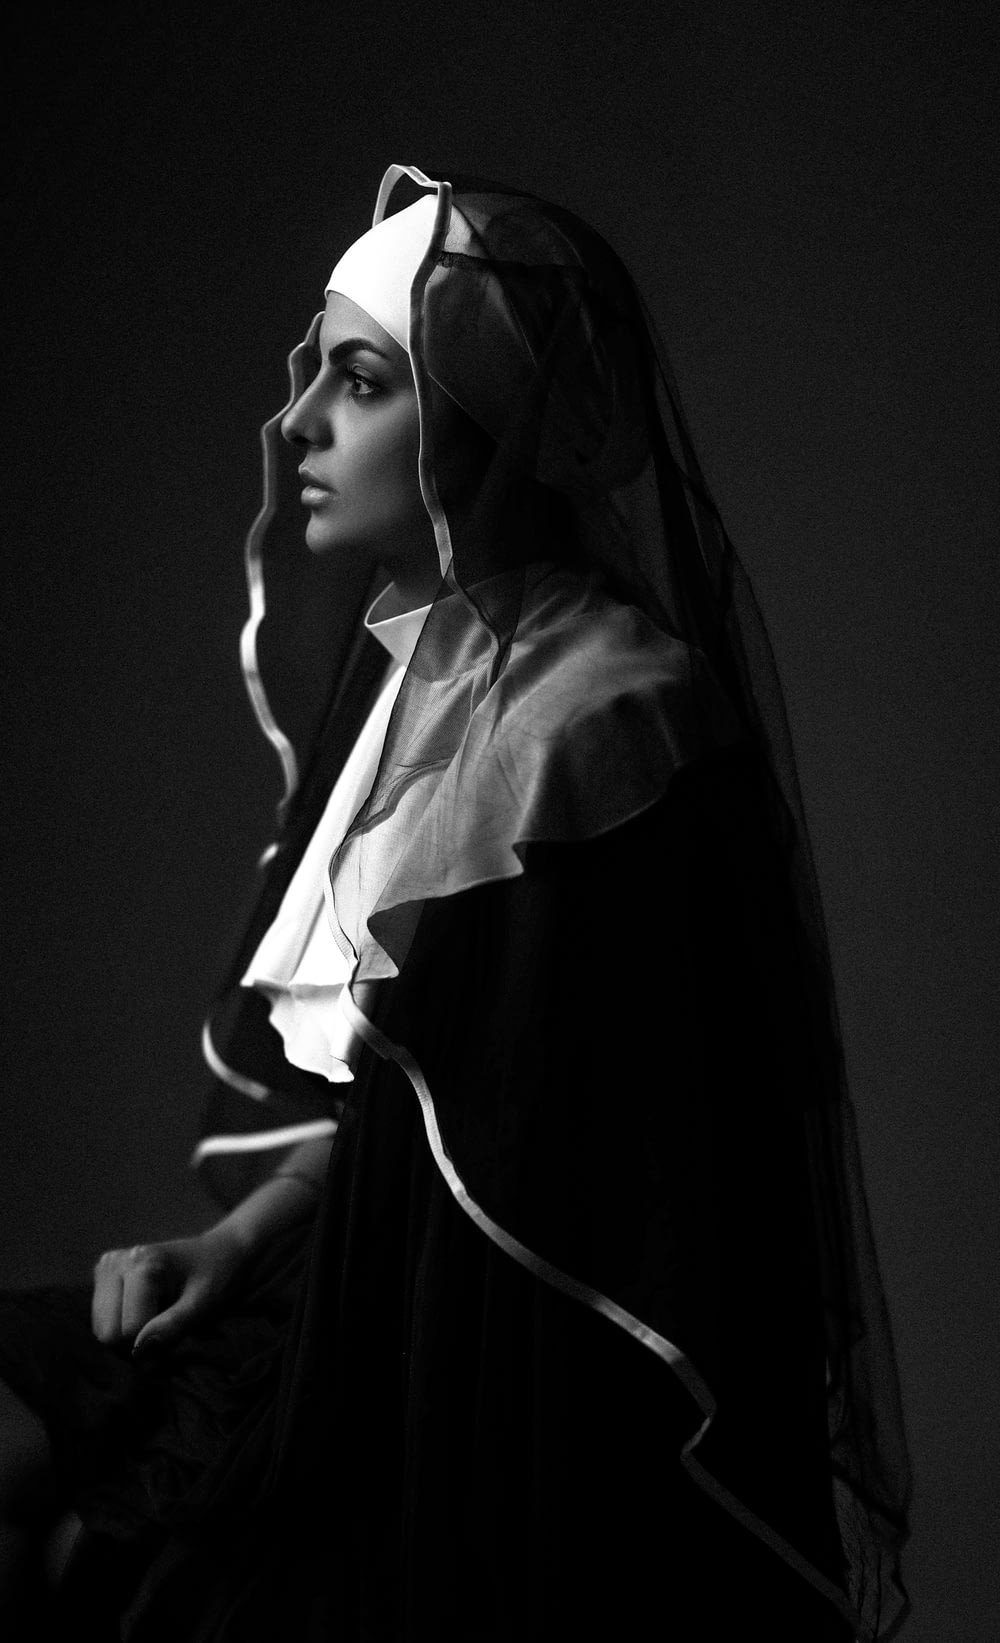 a black and white photo of a woman wearing a veil